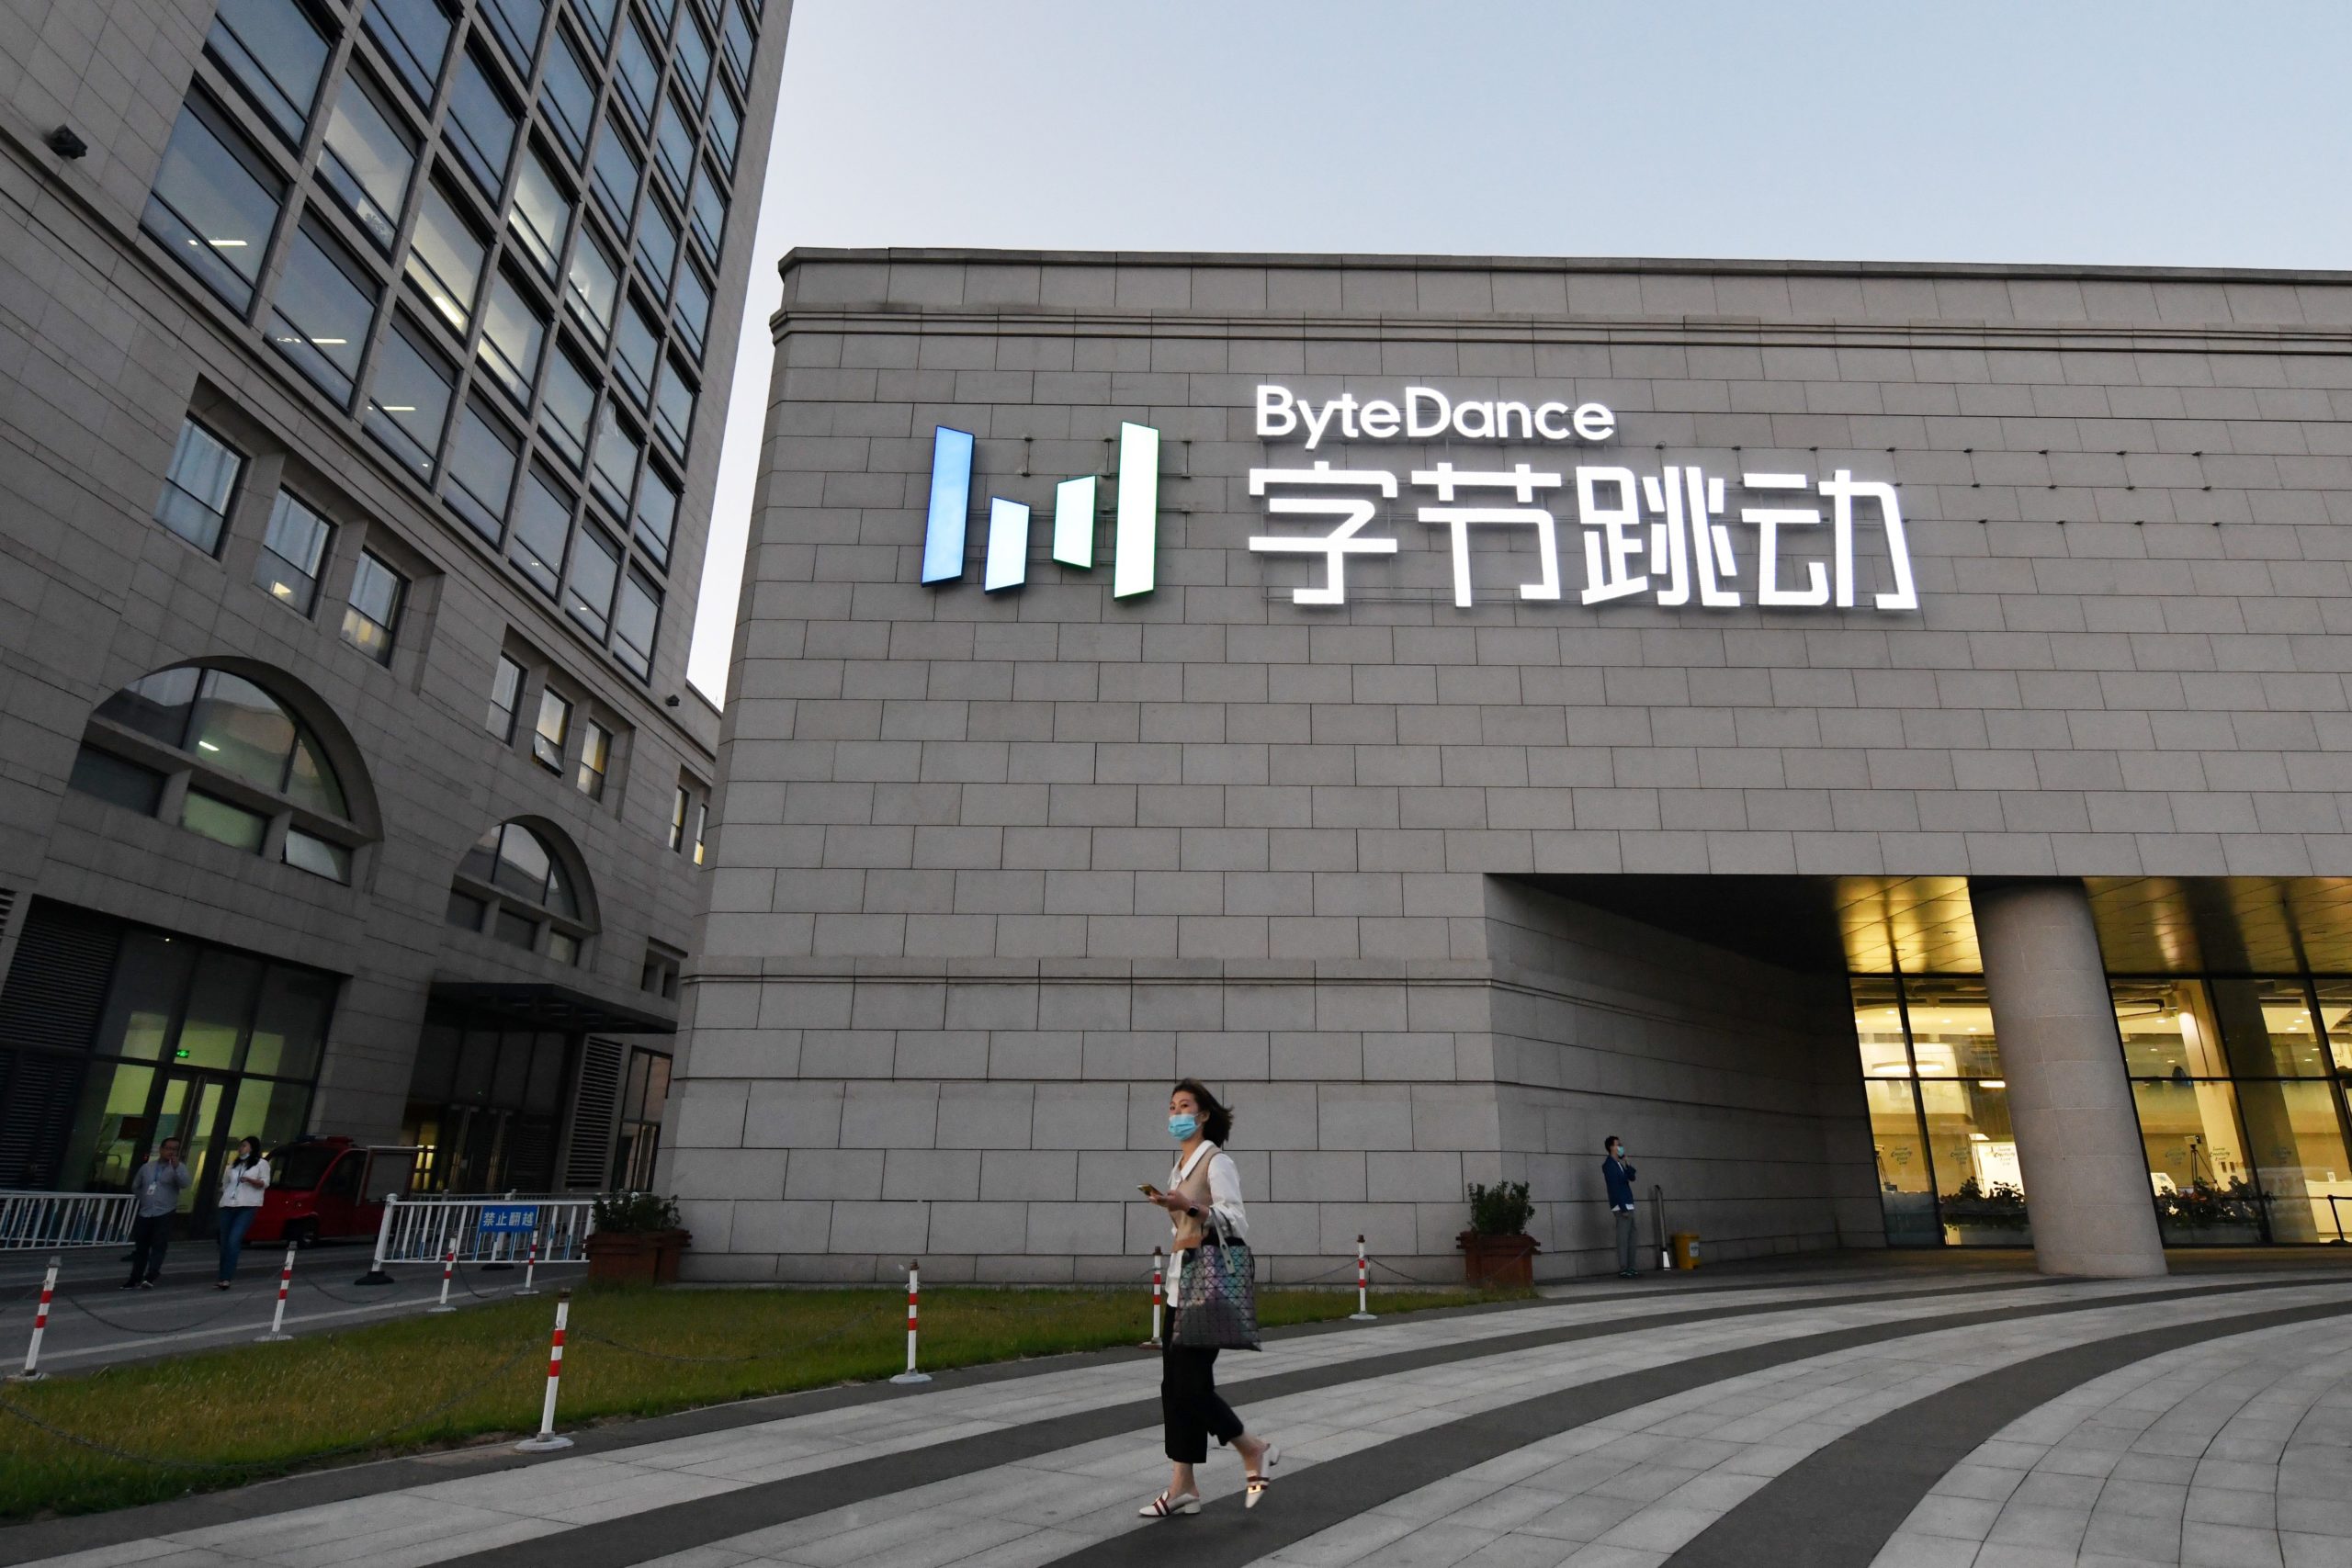 A woman walks past the headquarters of ByteDance, the parent company of video sharing app TikTok, in Beijing on September 16, 2020. (Photo by GREG BAKER/AFP via Getty Images)